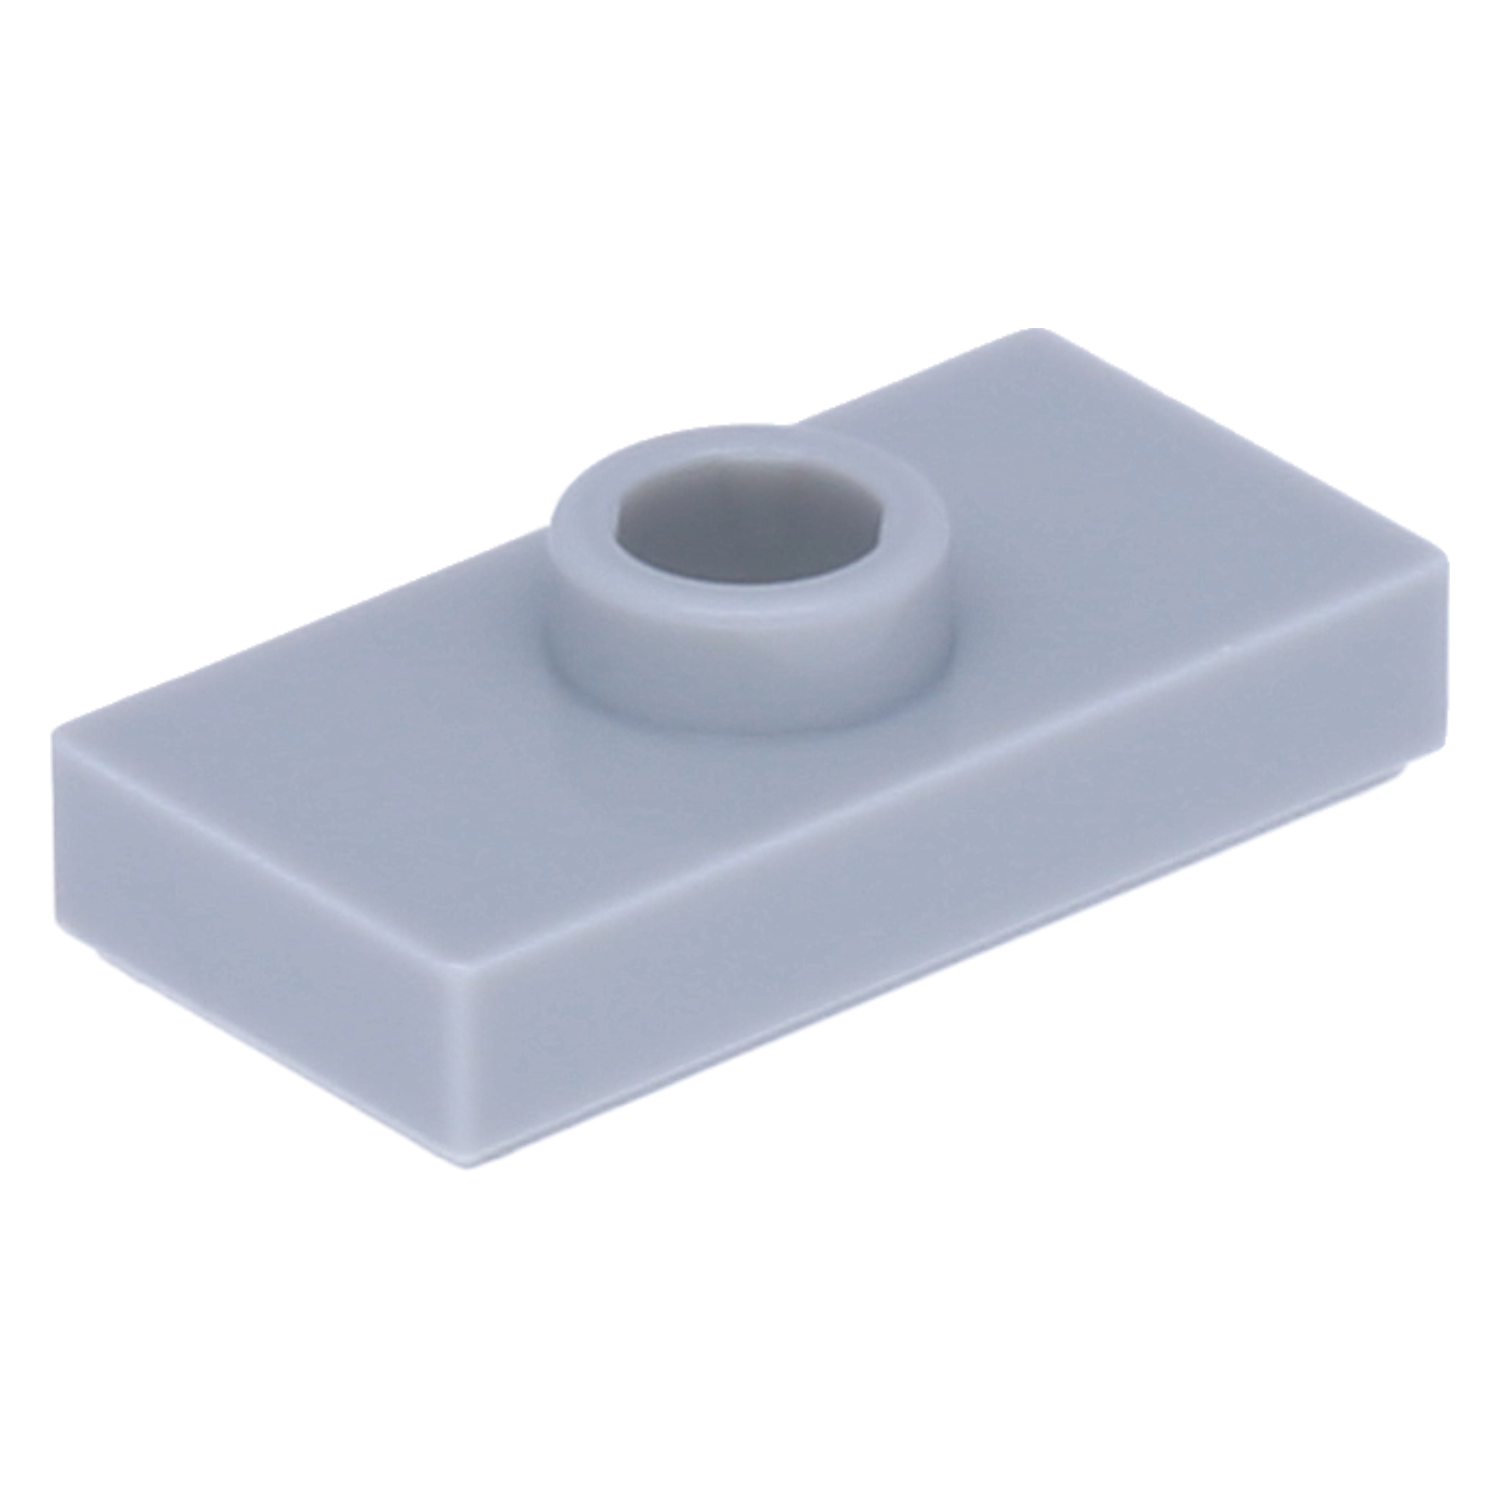 Lego plates (modified) - 1 x 2 with 1 knob and lower knob holder